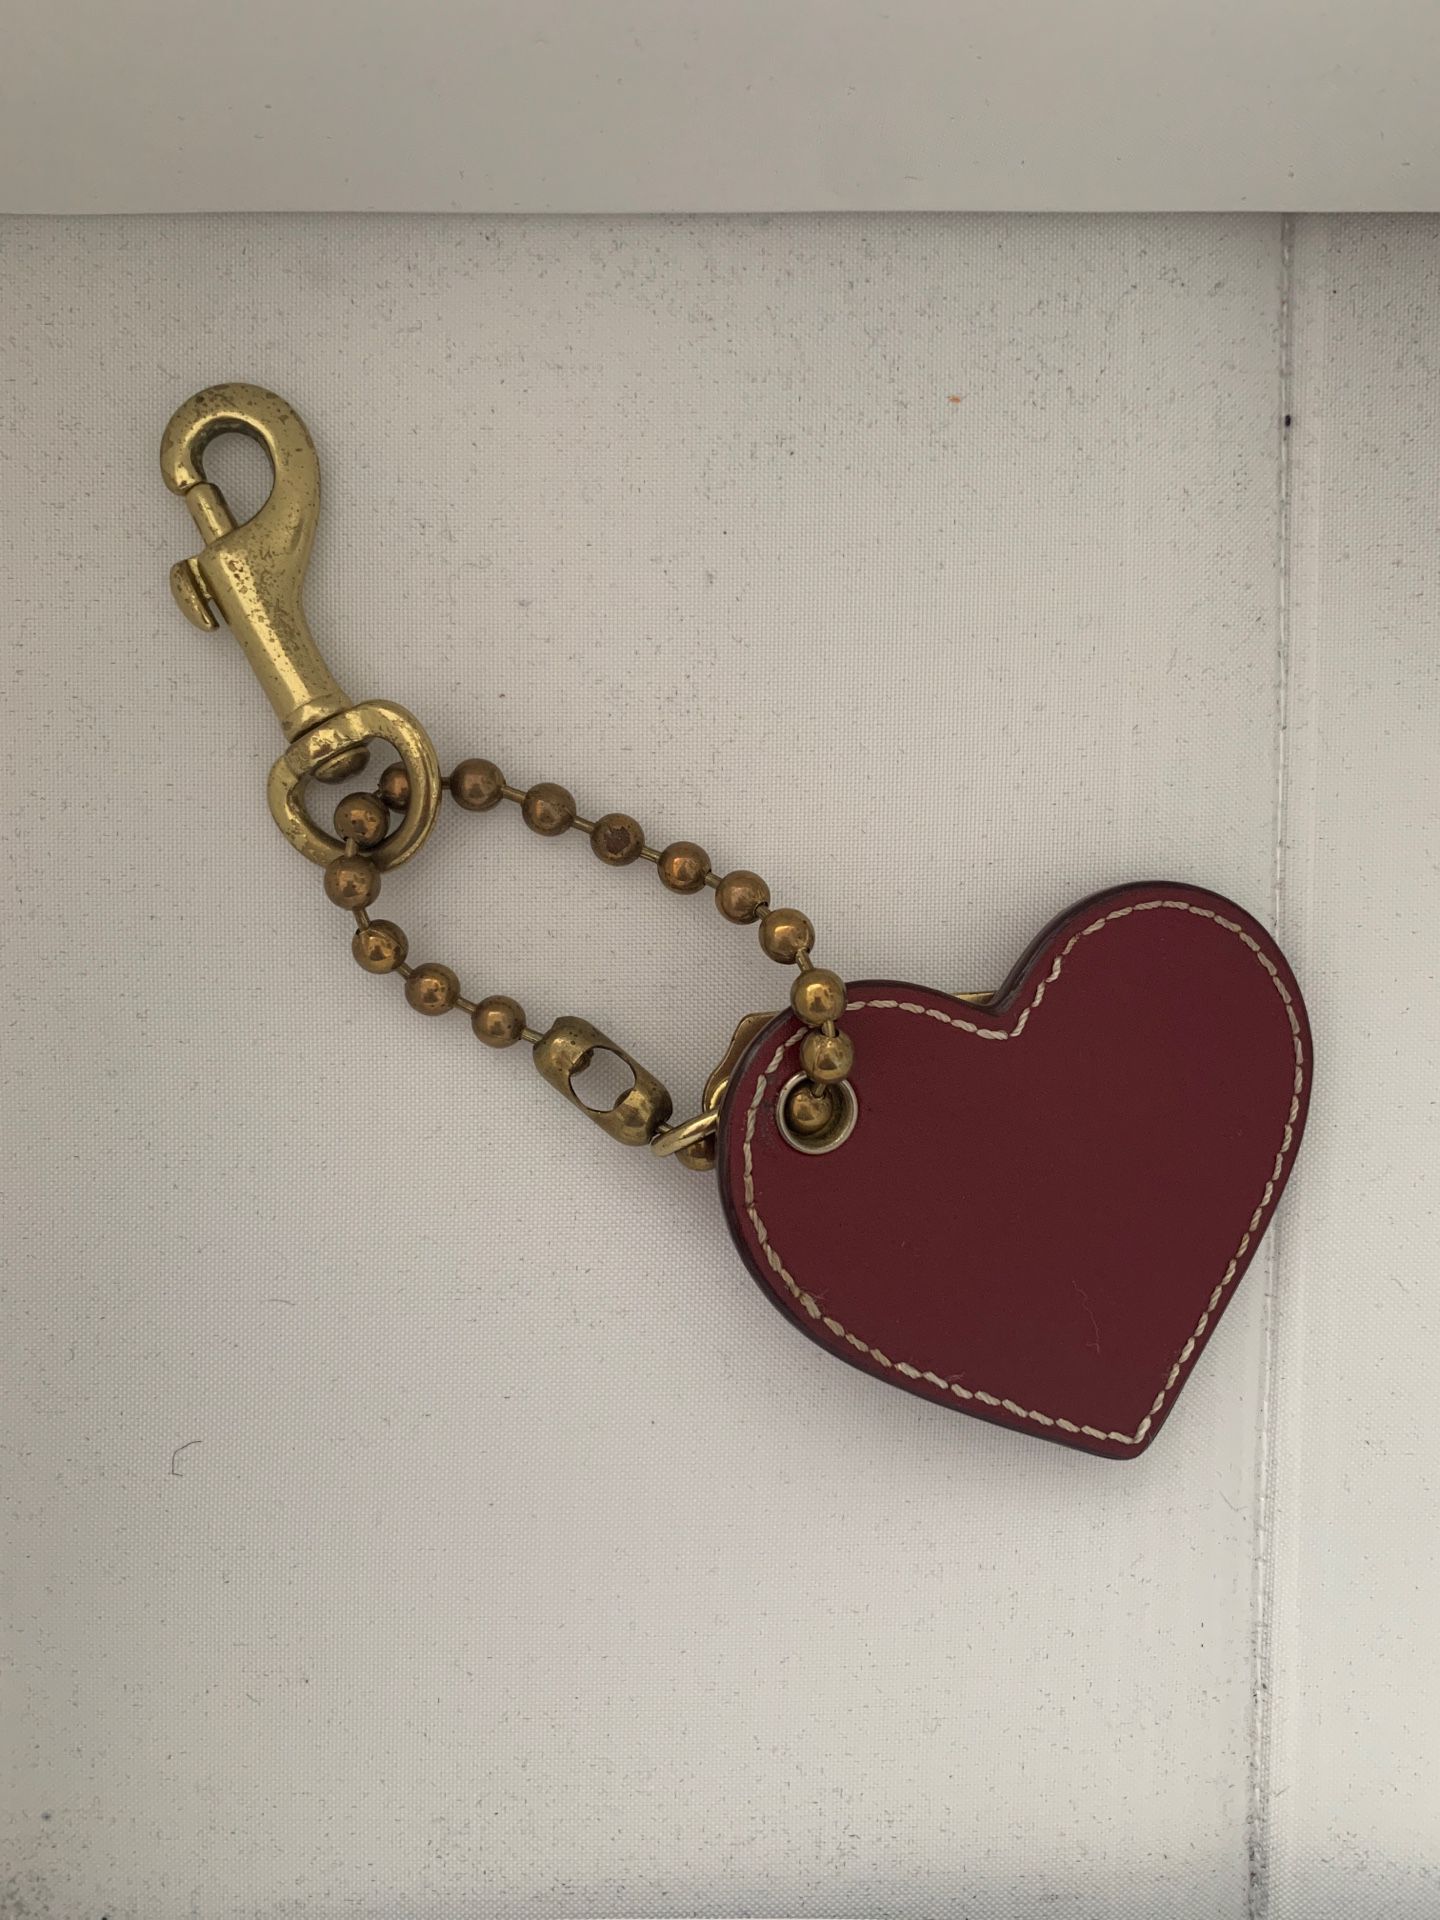 Coach handbag accessory / pink red heart keychain for Sale in Miami, FL -  OfferUp